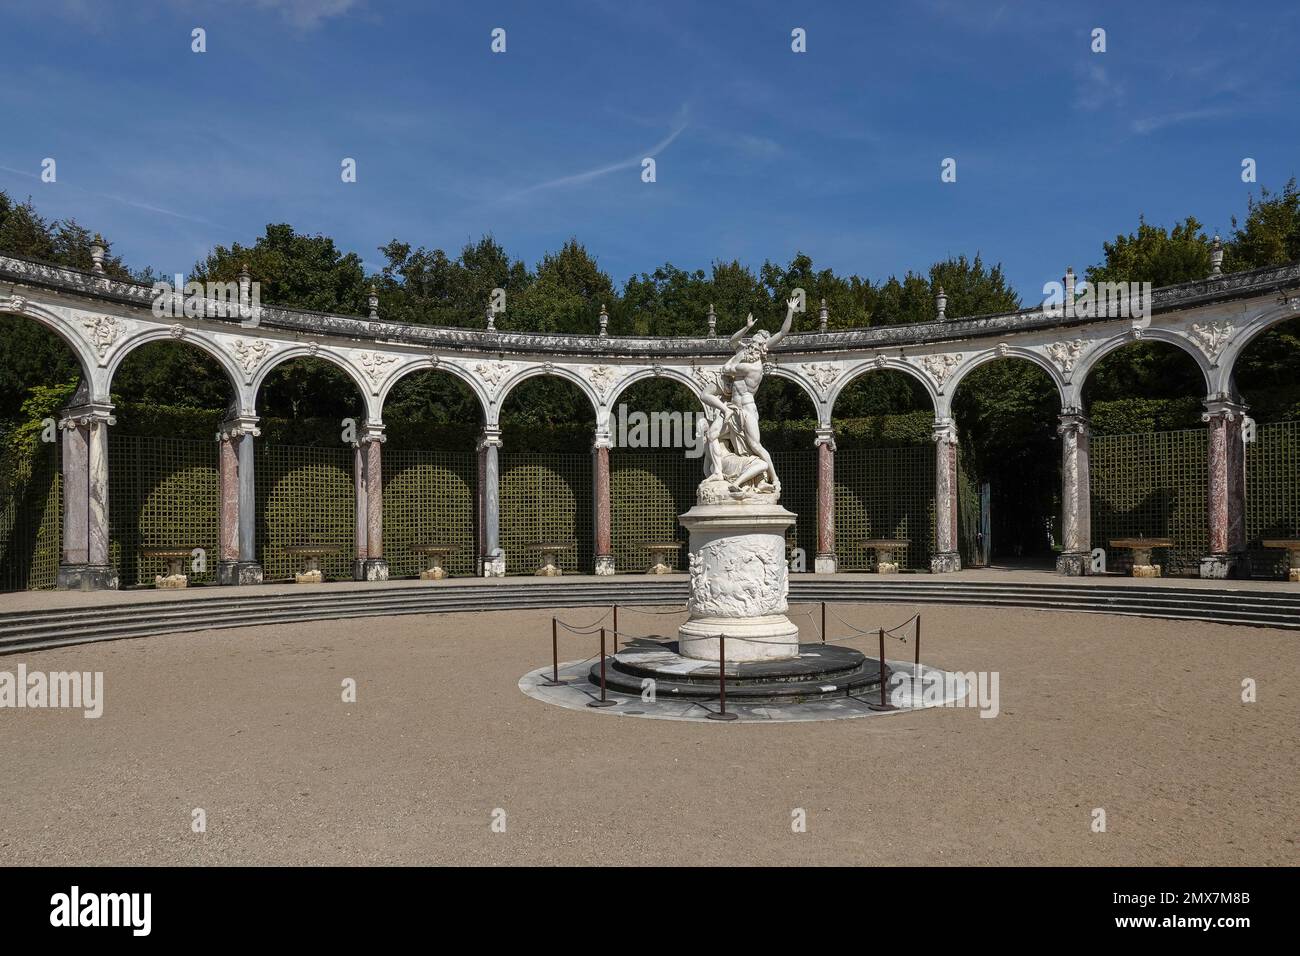 France, Versailles, Gardens of the famous Palace of Versailles. whole site have unique fountains, ponds, lake and landscapes built in 17th c.   Photo Stock Photo